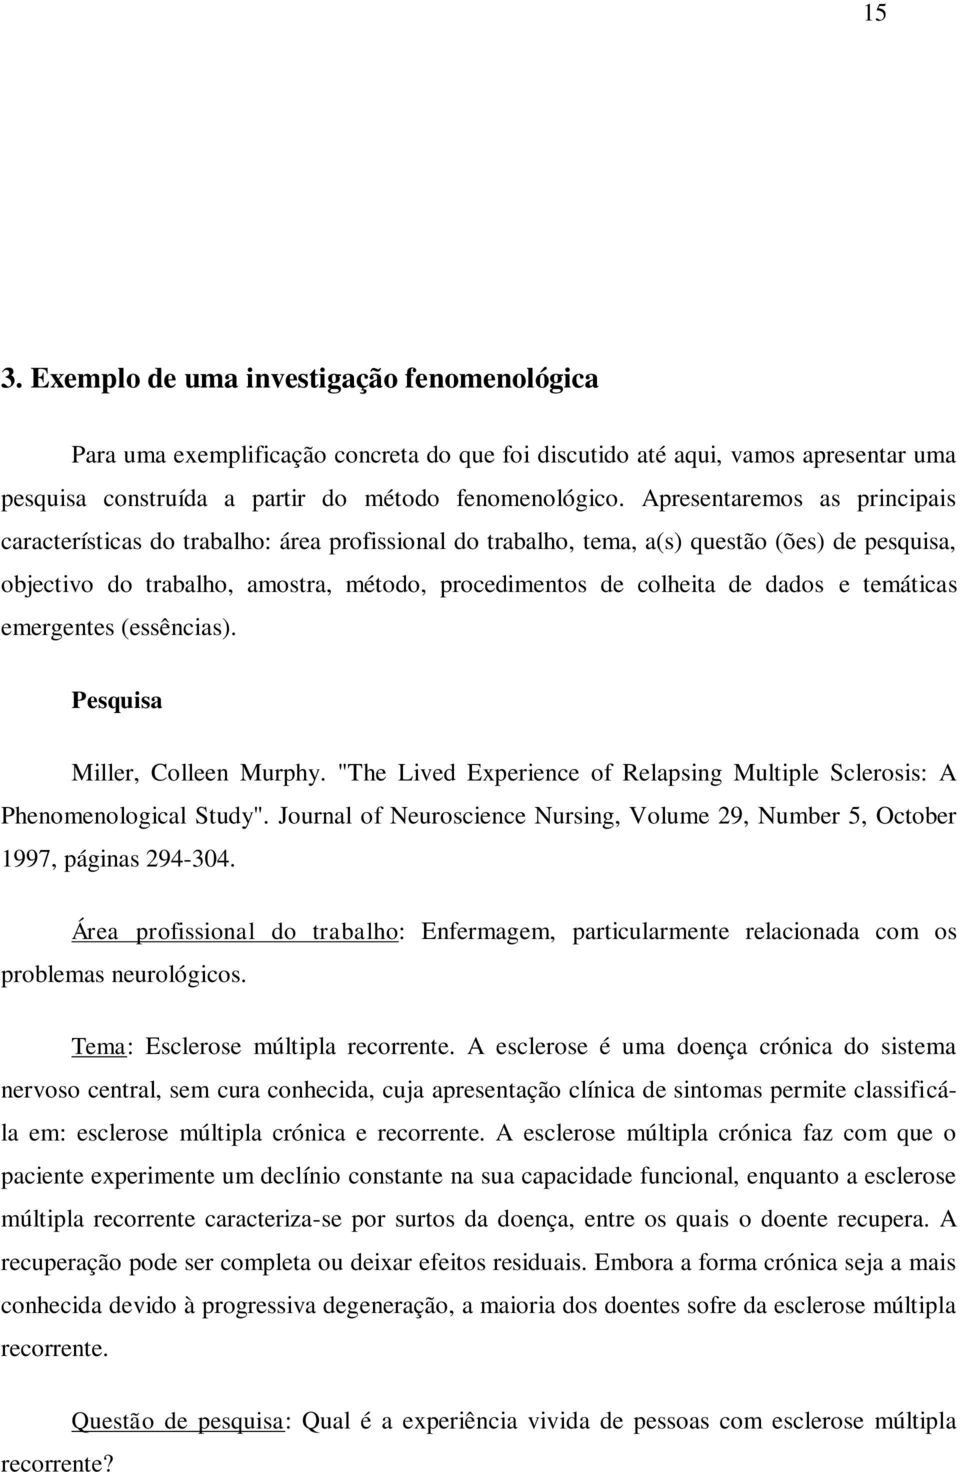 dados e temáticas emergentes (essências). Pesquisa Miller, Colleen Murphy. "The Lived Experience of Relapsing Multiple Sclerosis: A Phenomenological Study".